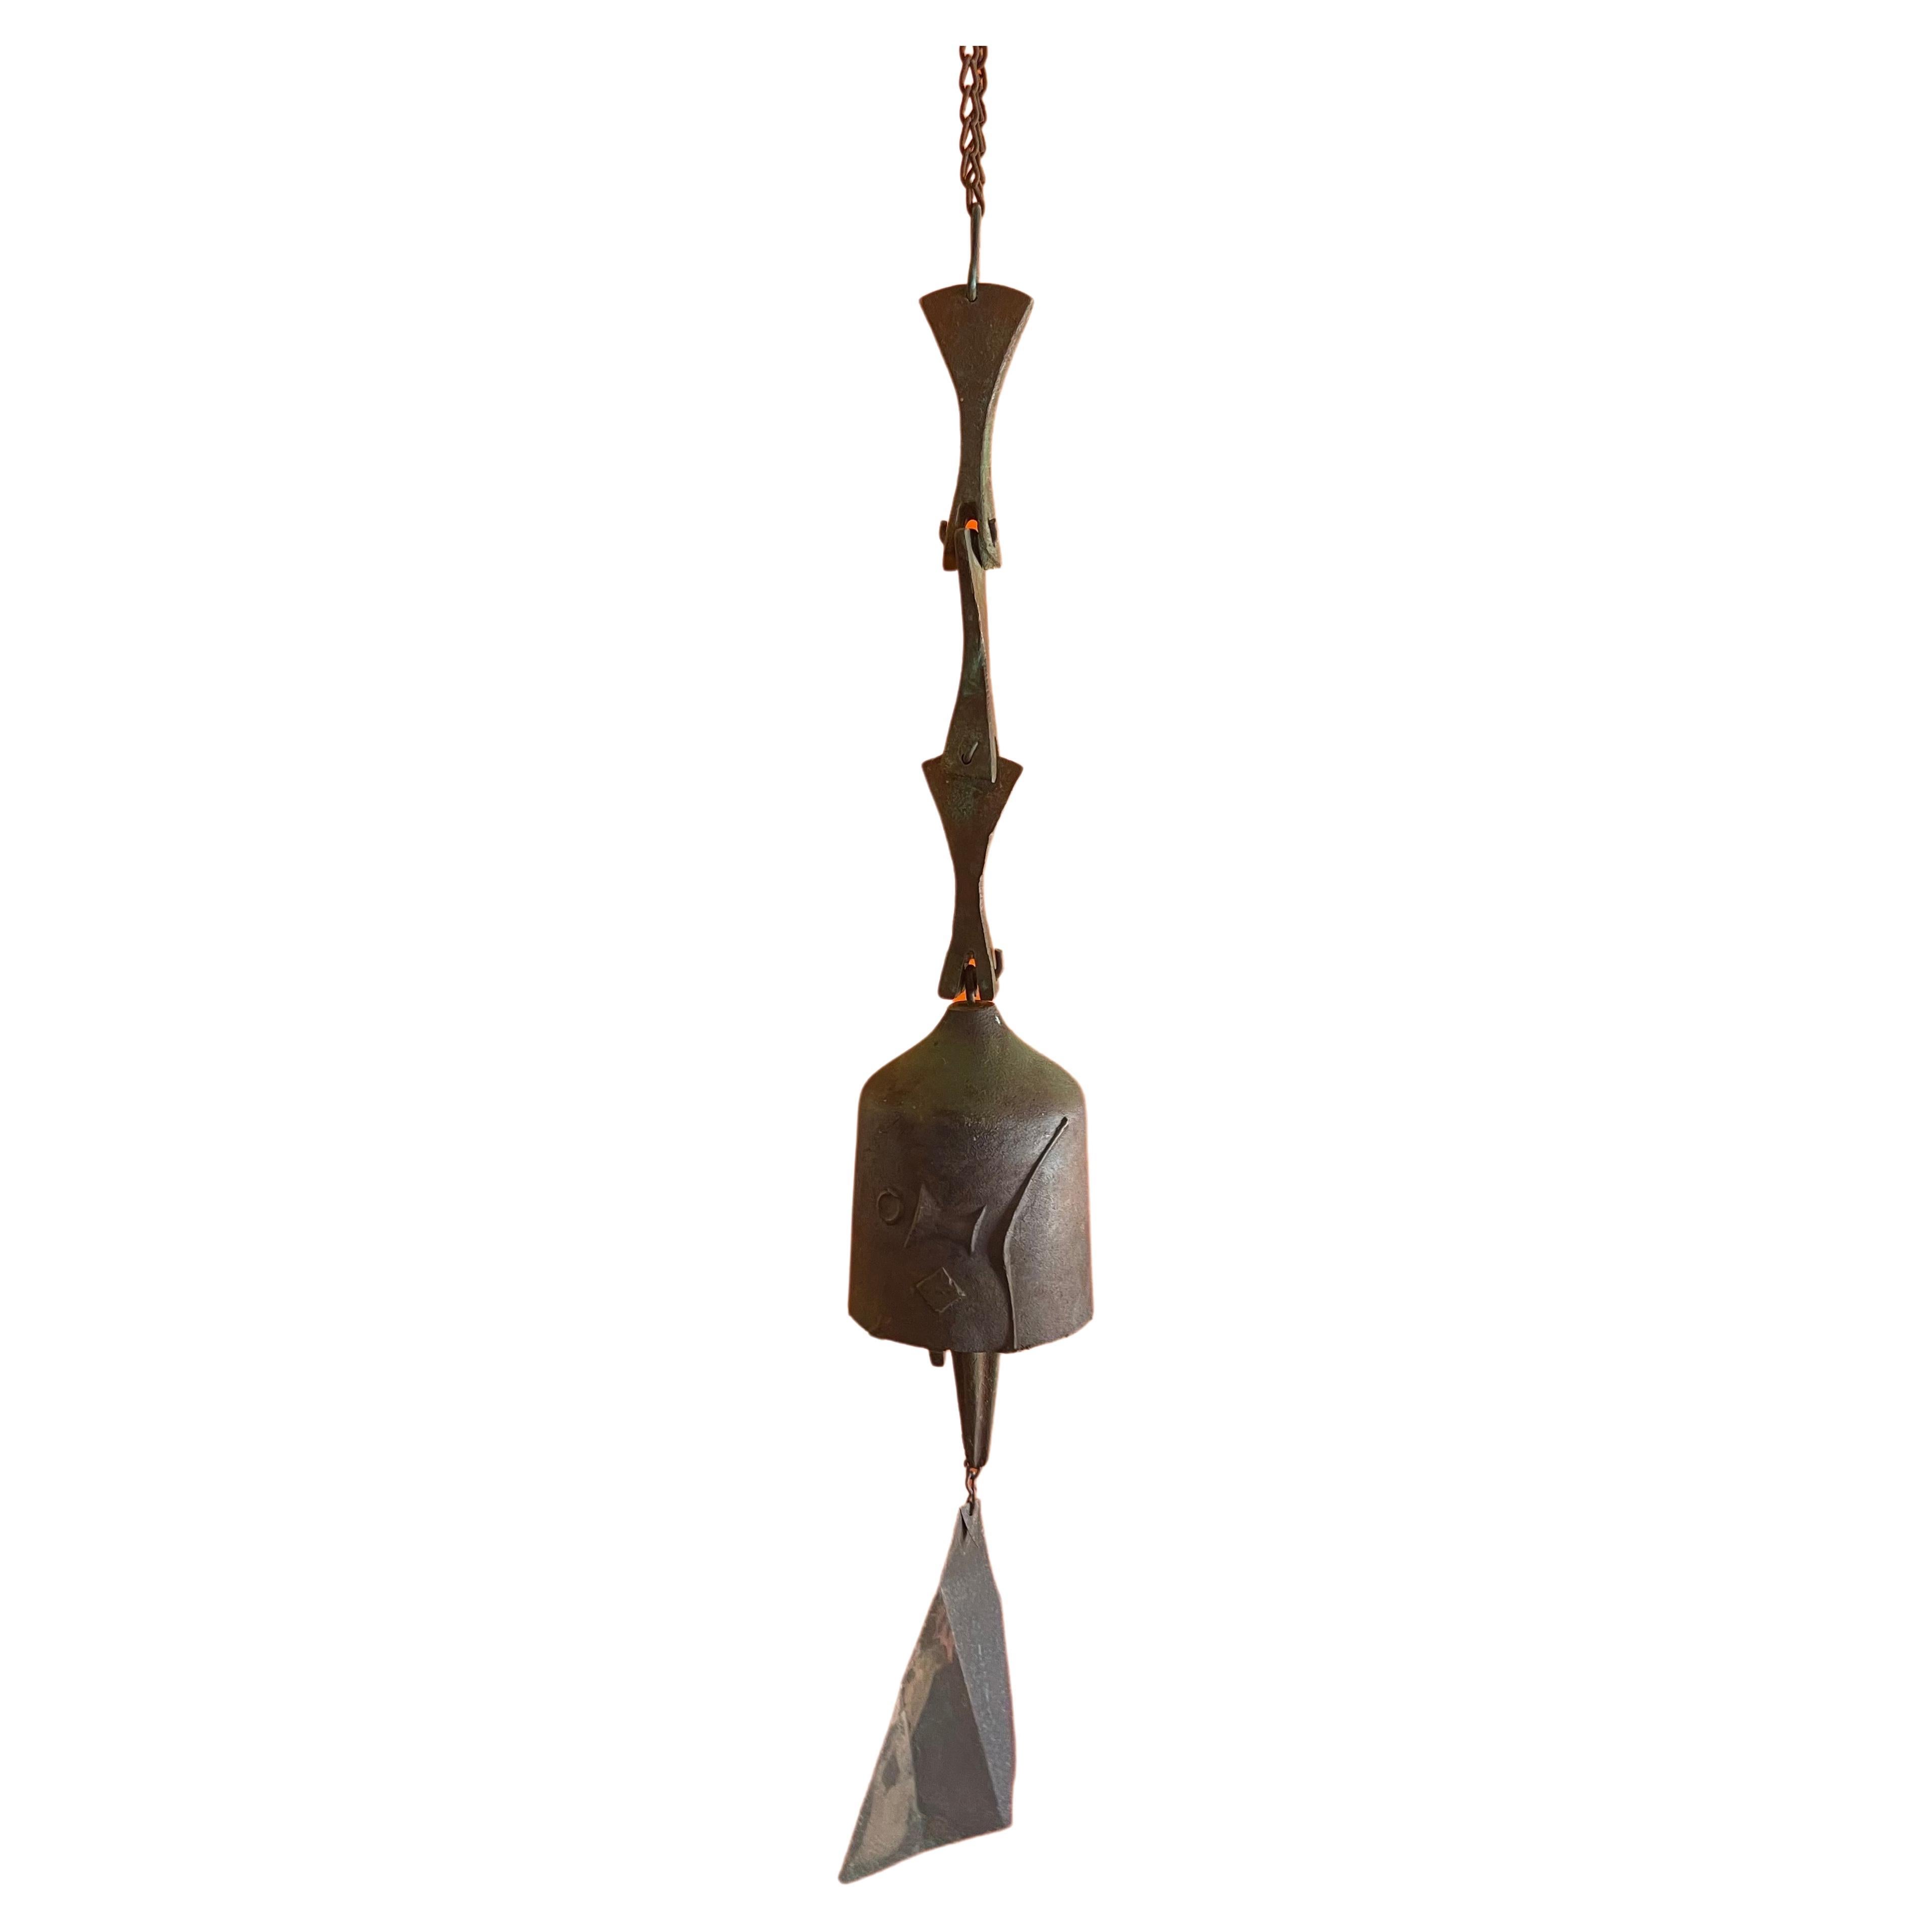 Bronze Wind Chime / Bell by Paolo Soleri for Cosanti